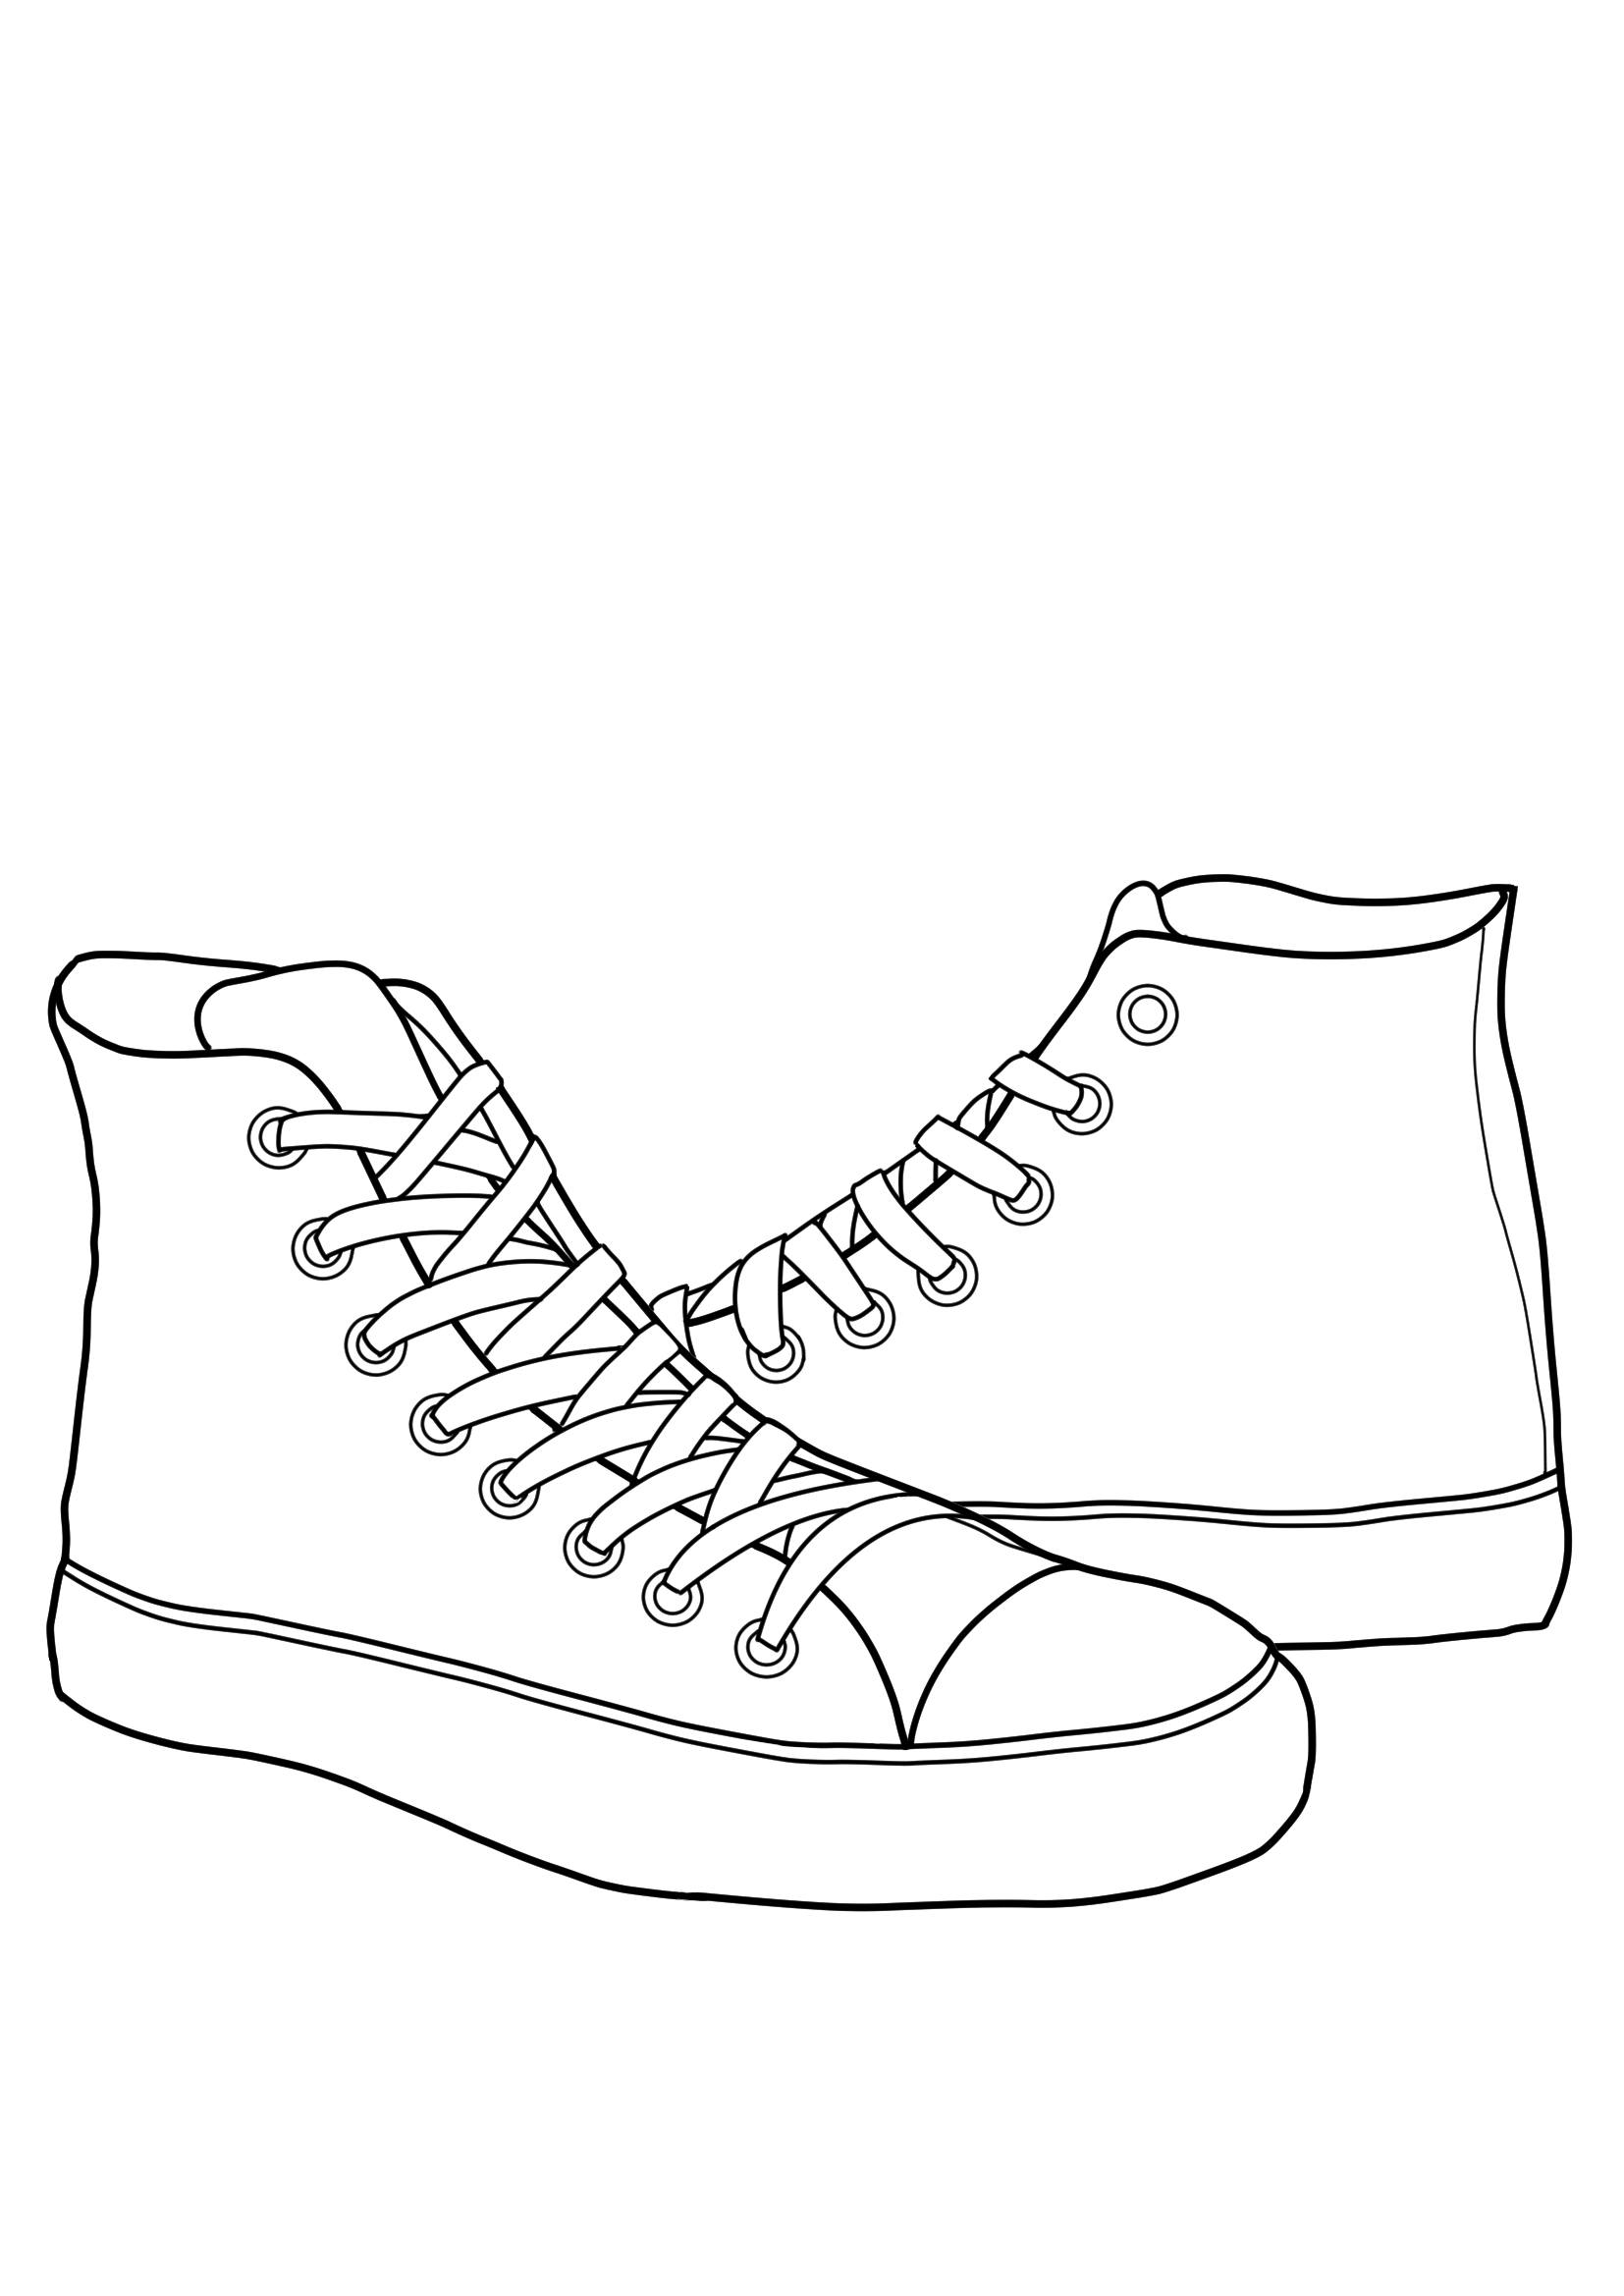 Shoe Outline Template